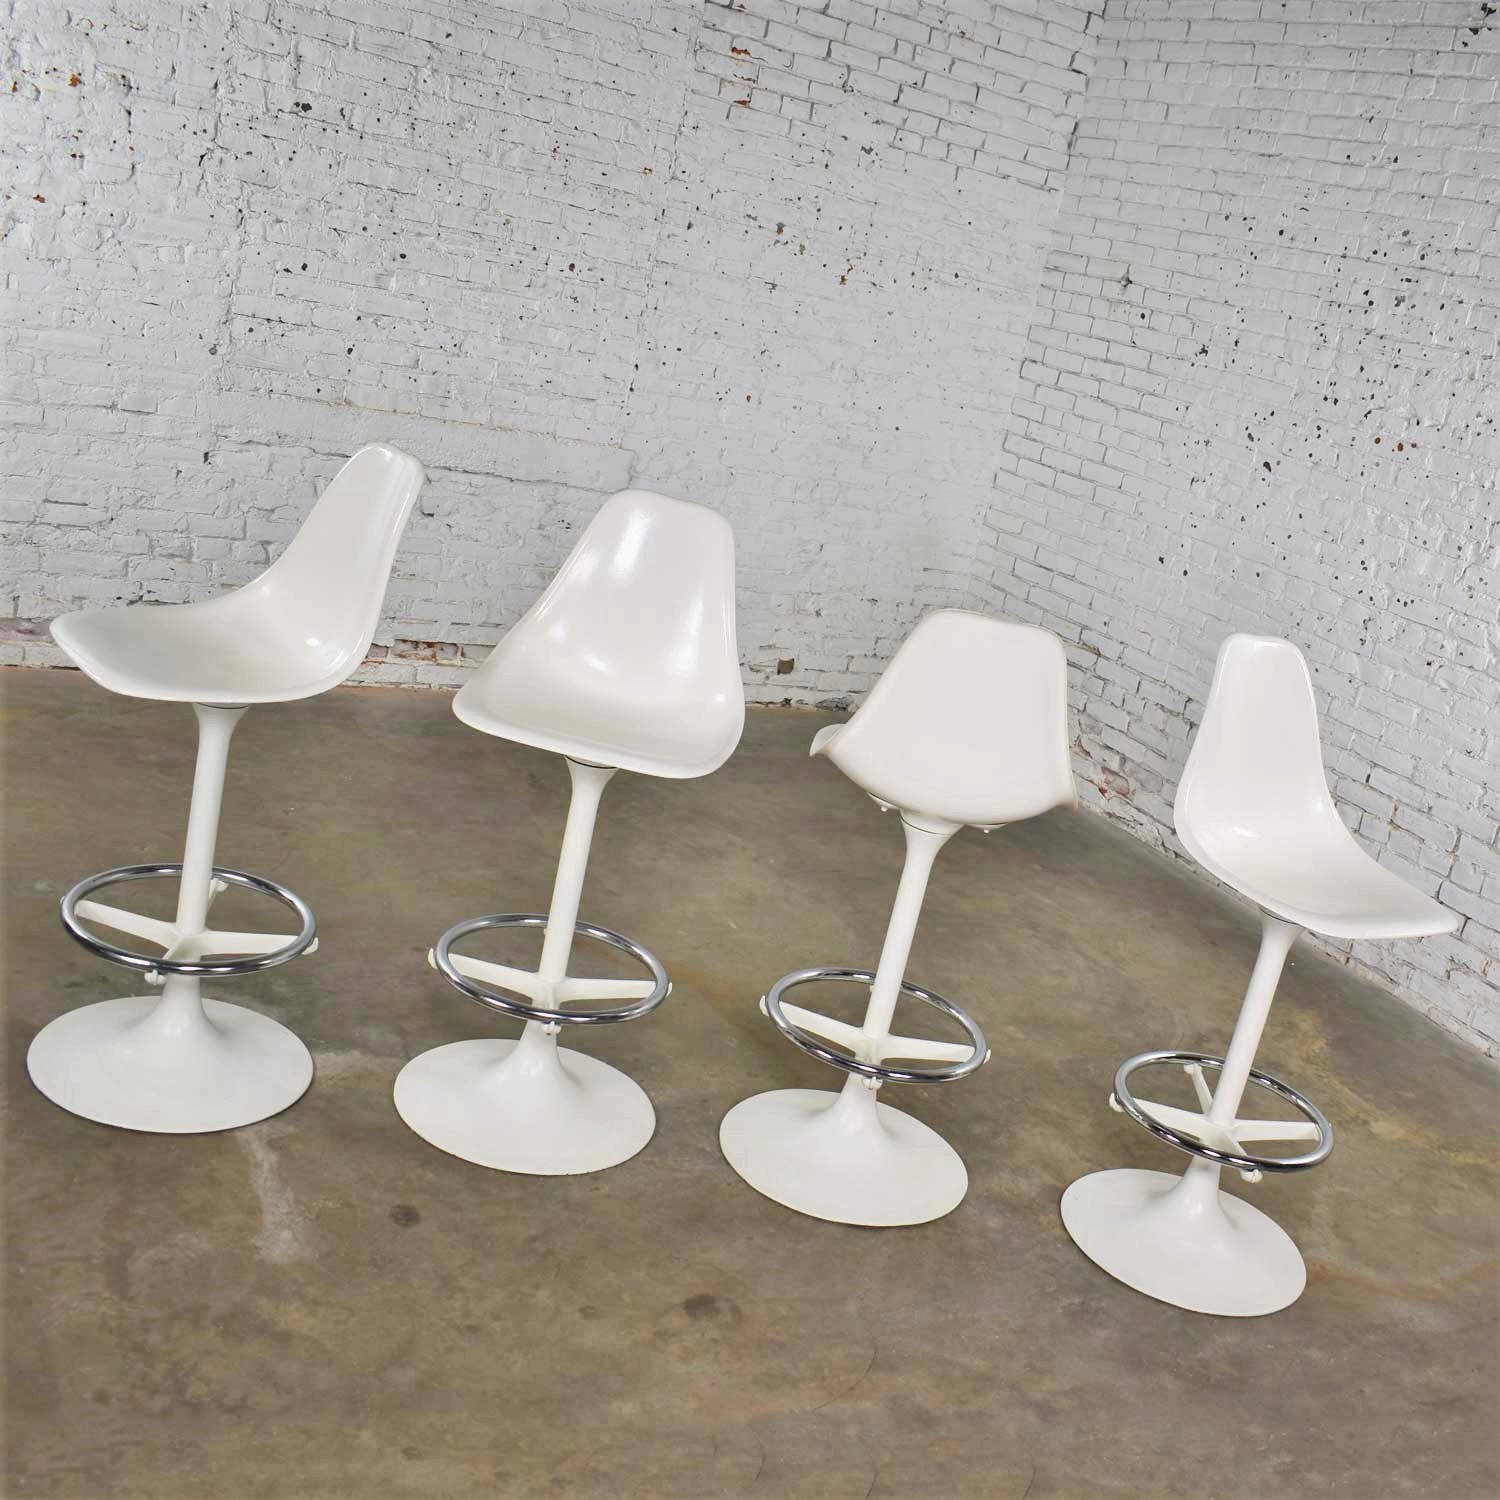 Set of Four Tulip Style White Swivel Barstools by Arthur Umanoff for Contemporary Shells